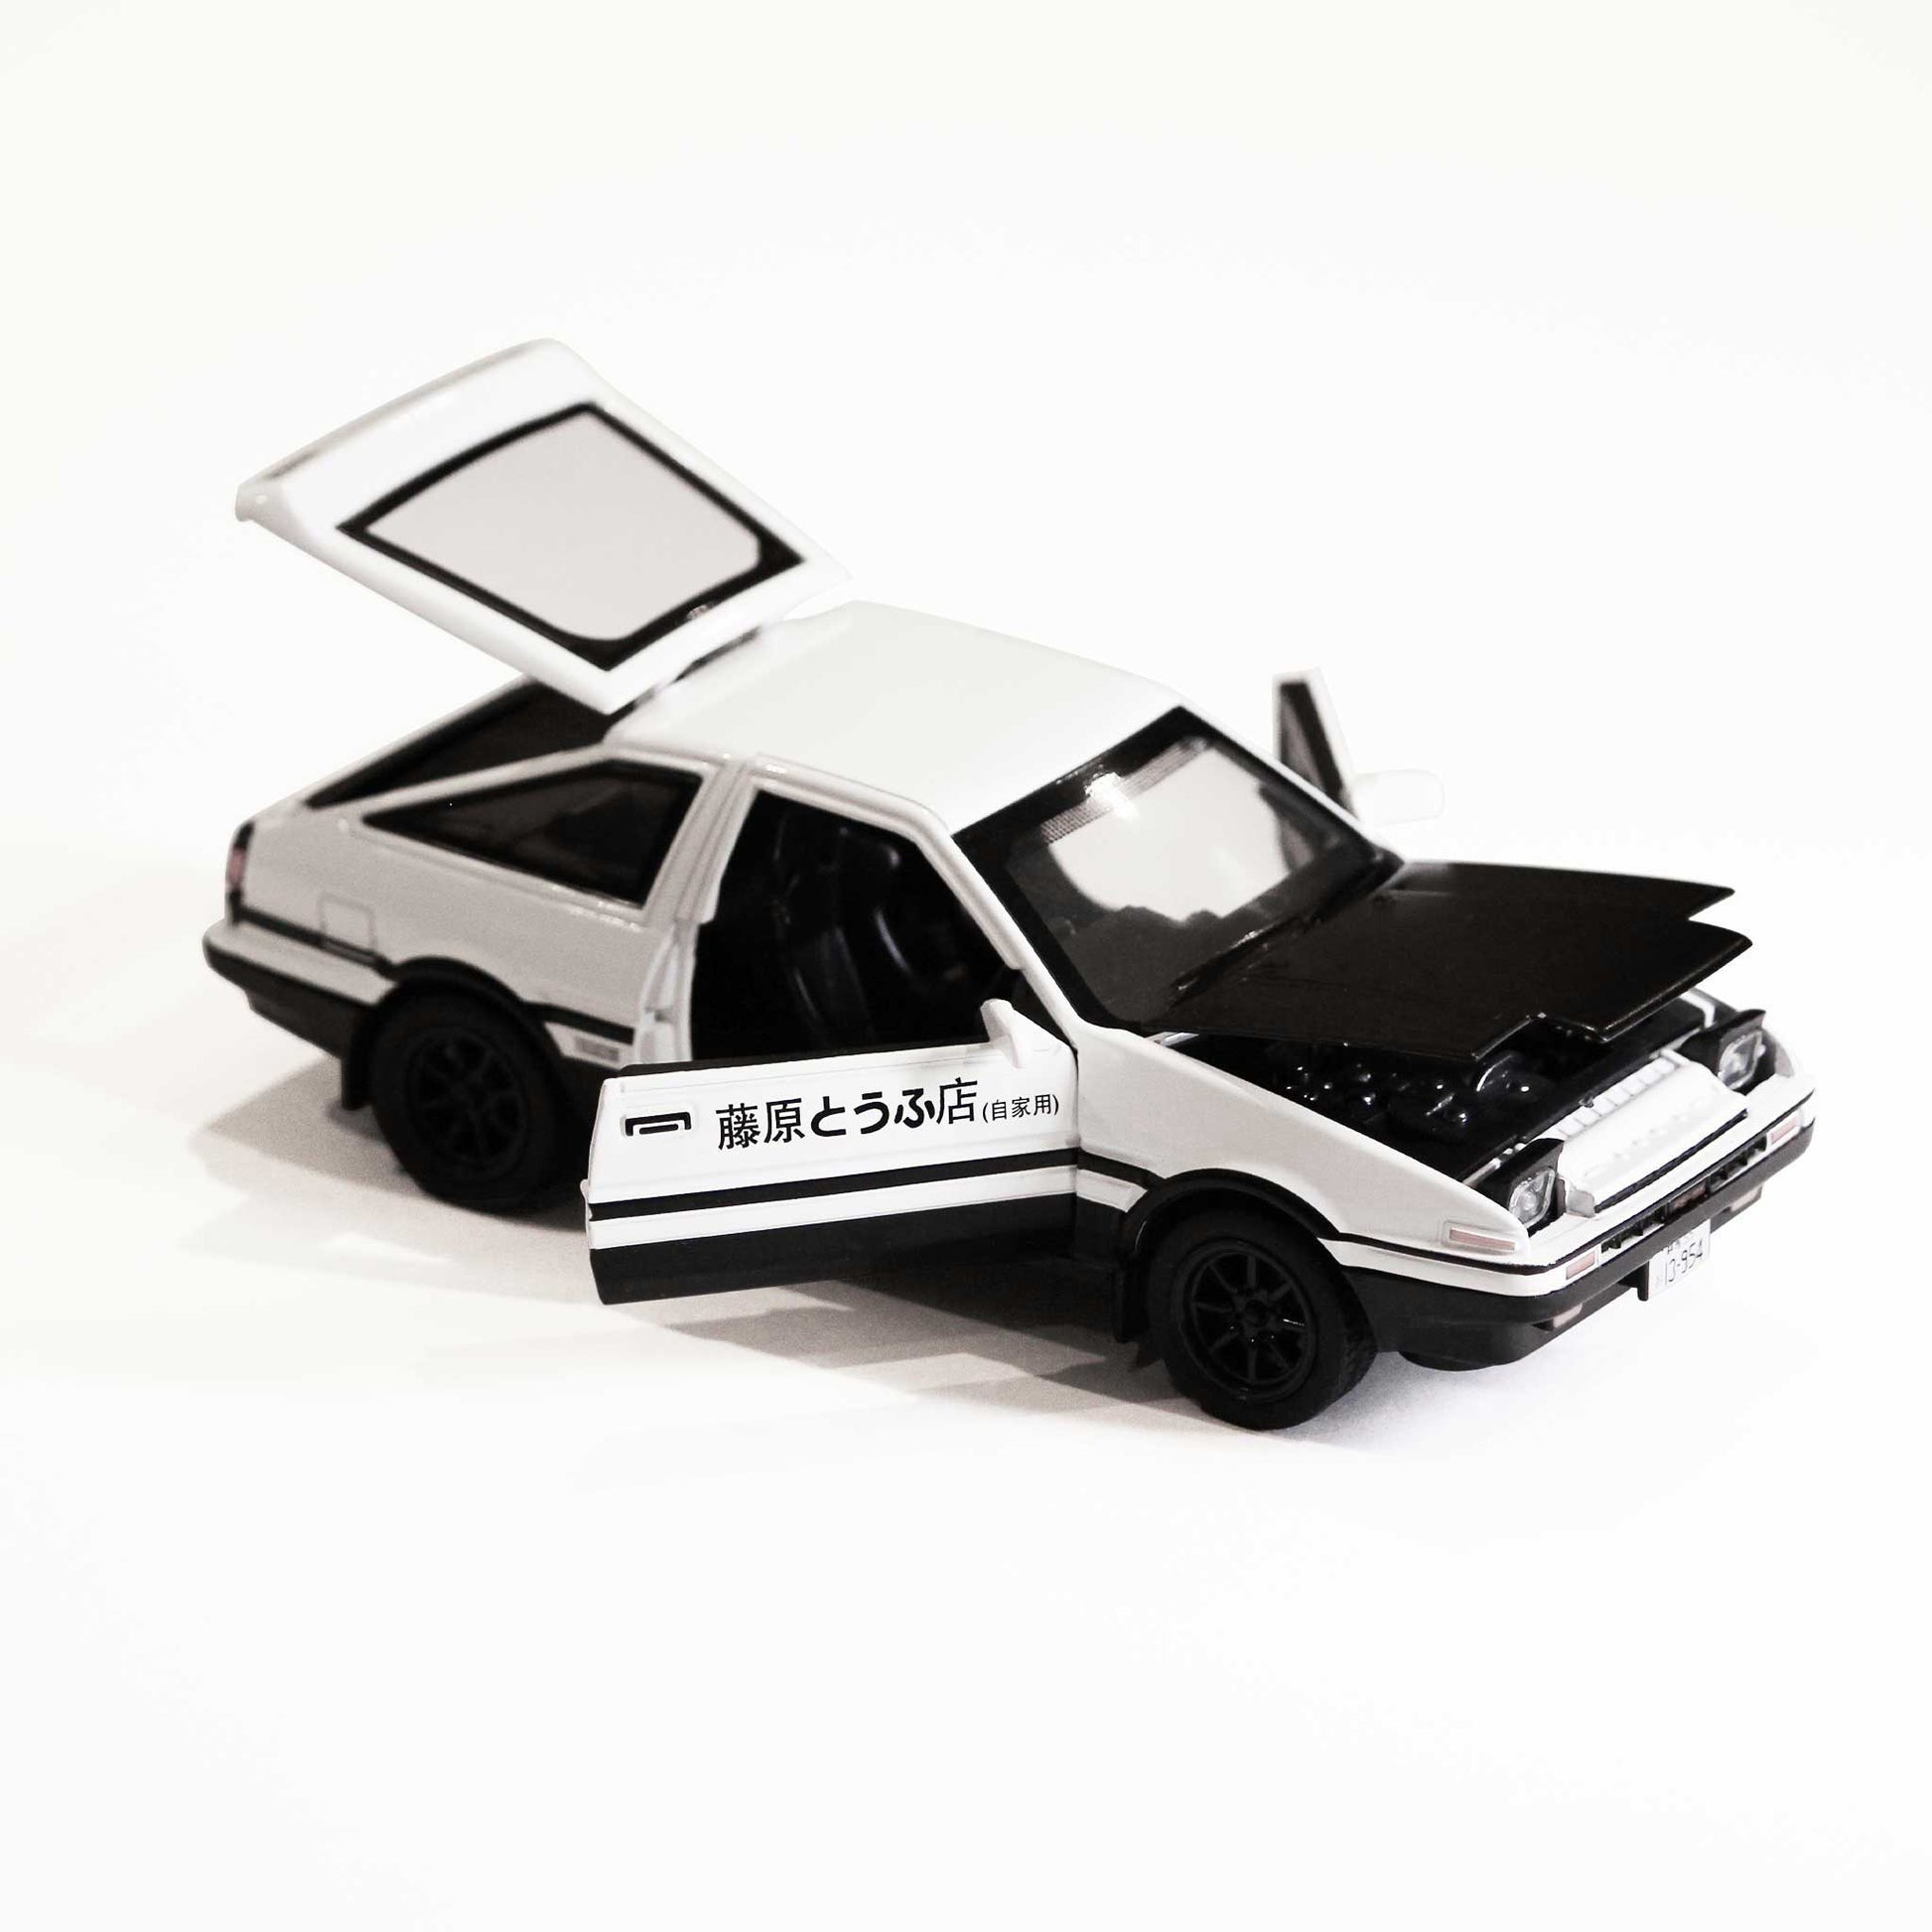 An AE86 car model with hood, side doors, trunk all opened